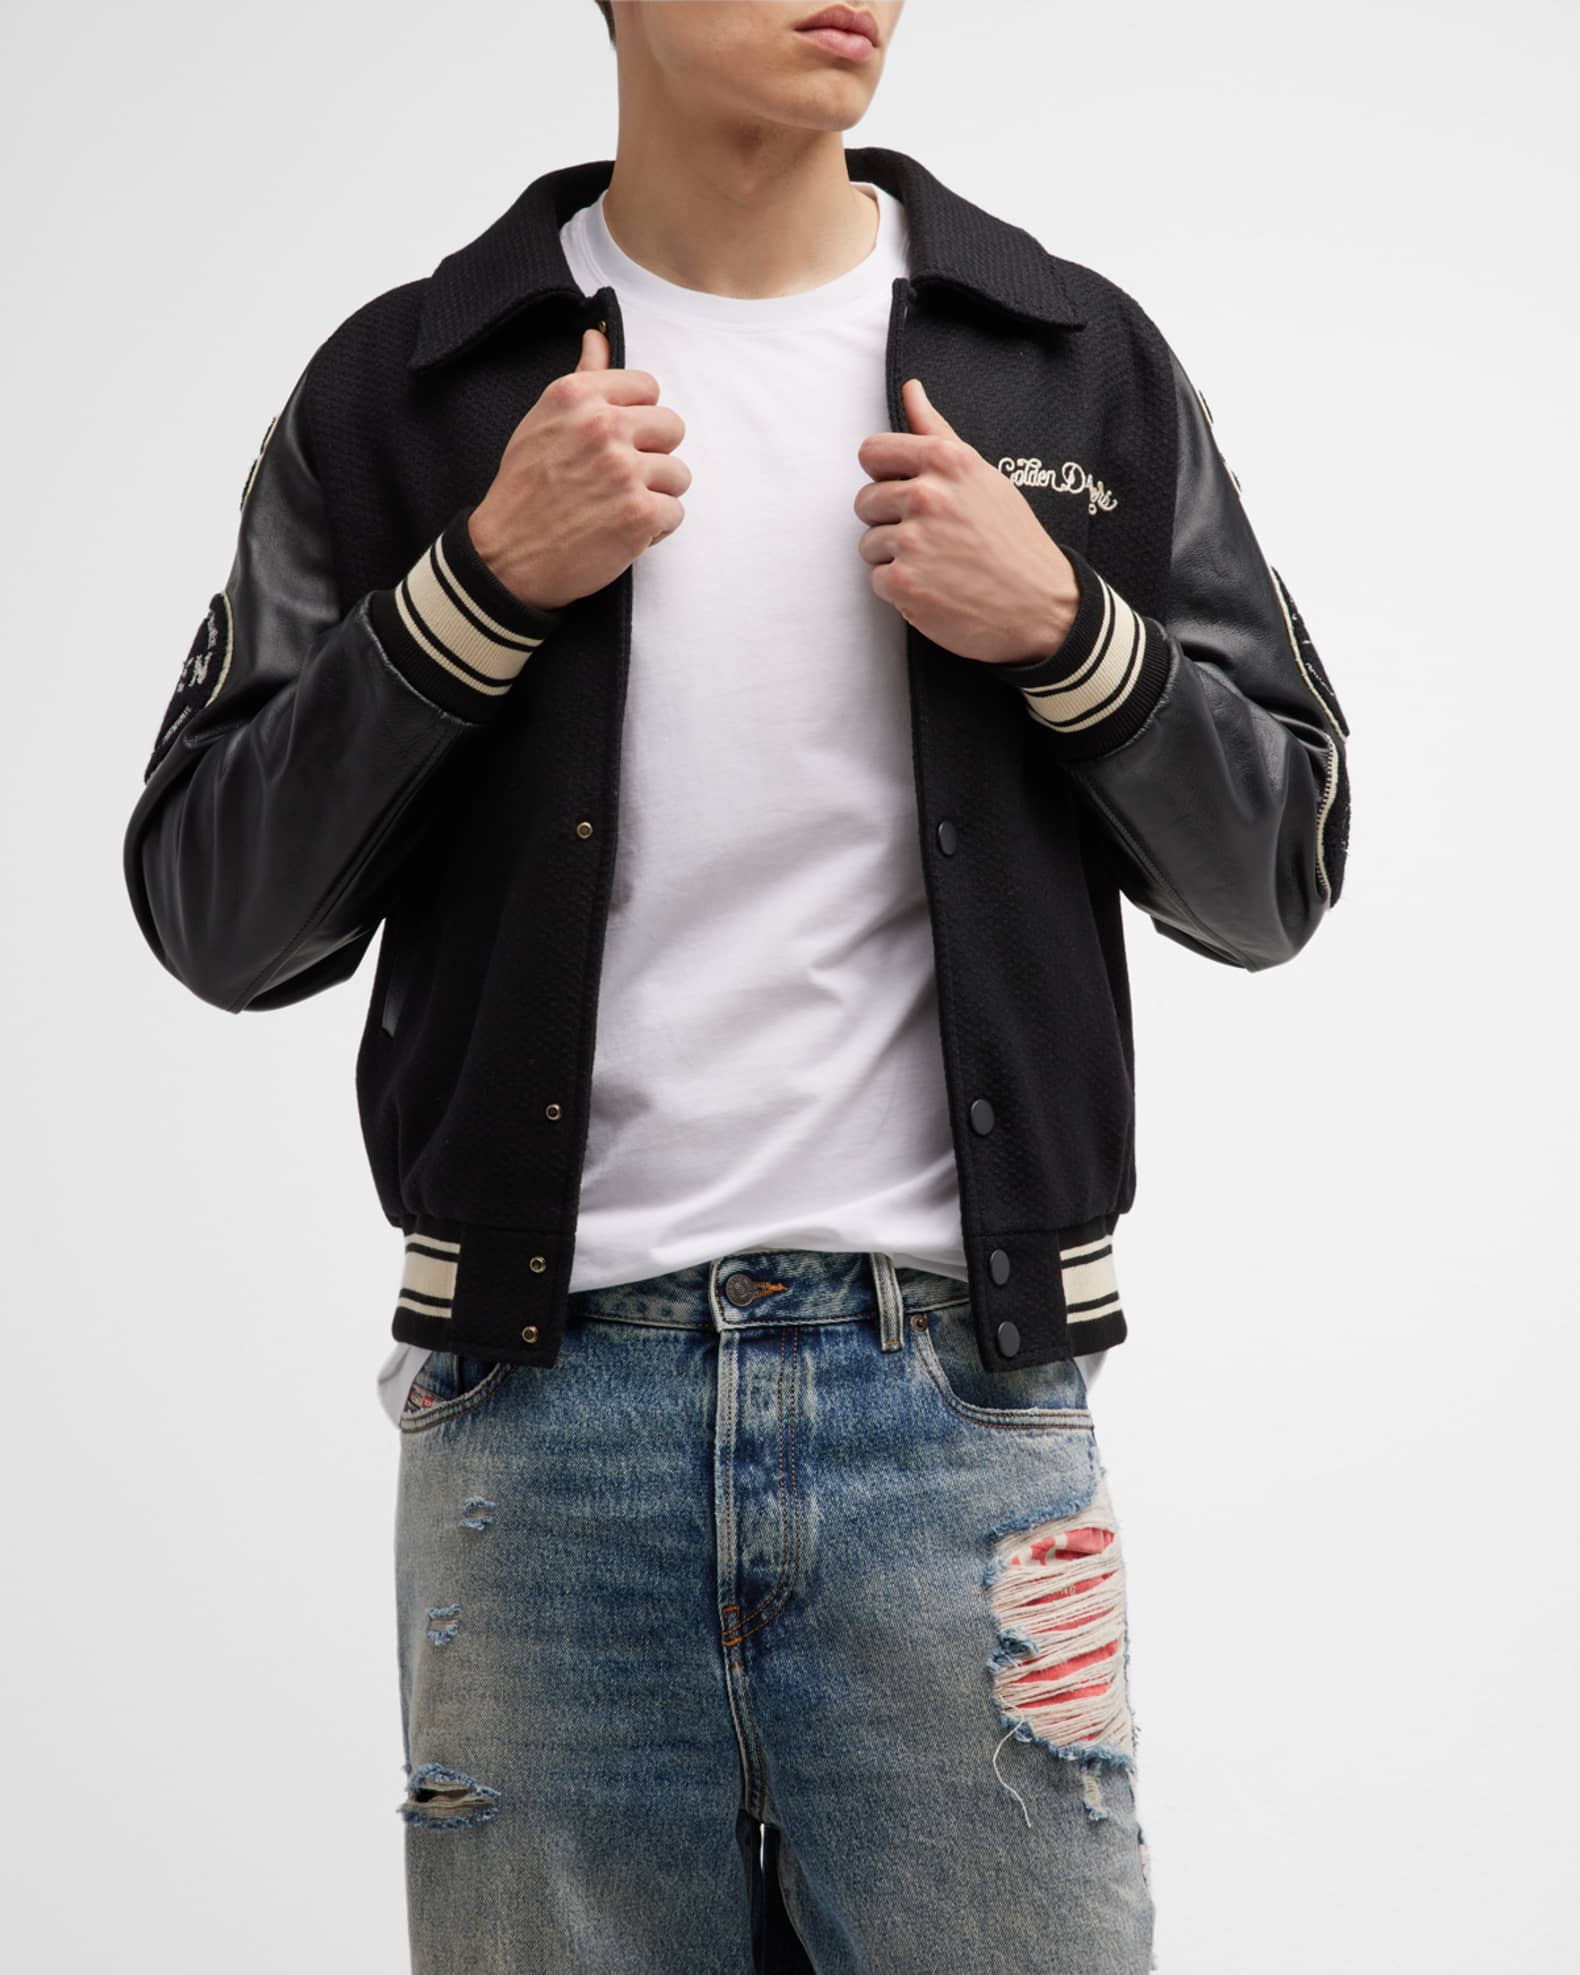 Golden Goose Men's Bomber Jacket with College Patches | Neiman Marcus